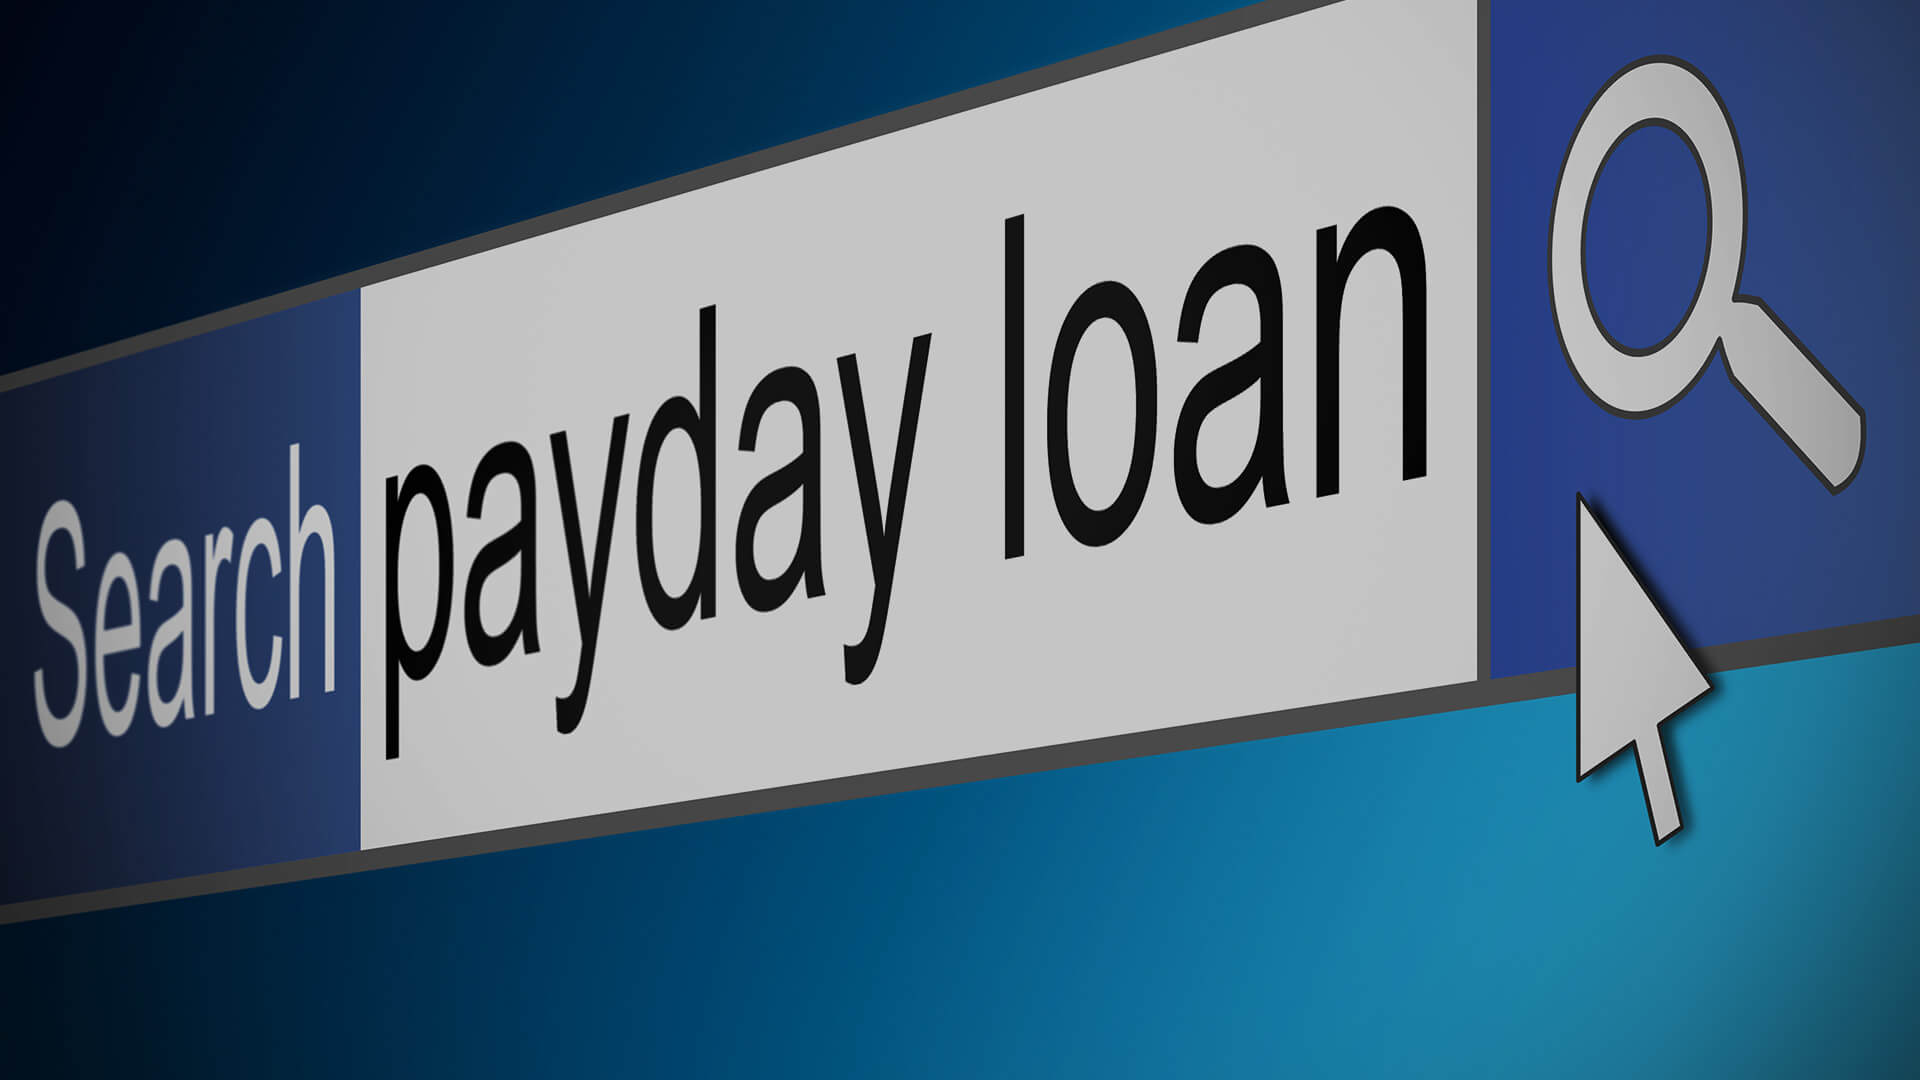 How To Find A Online Payday Loan